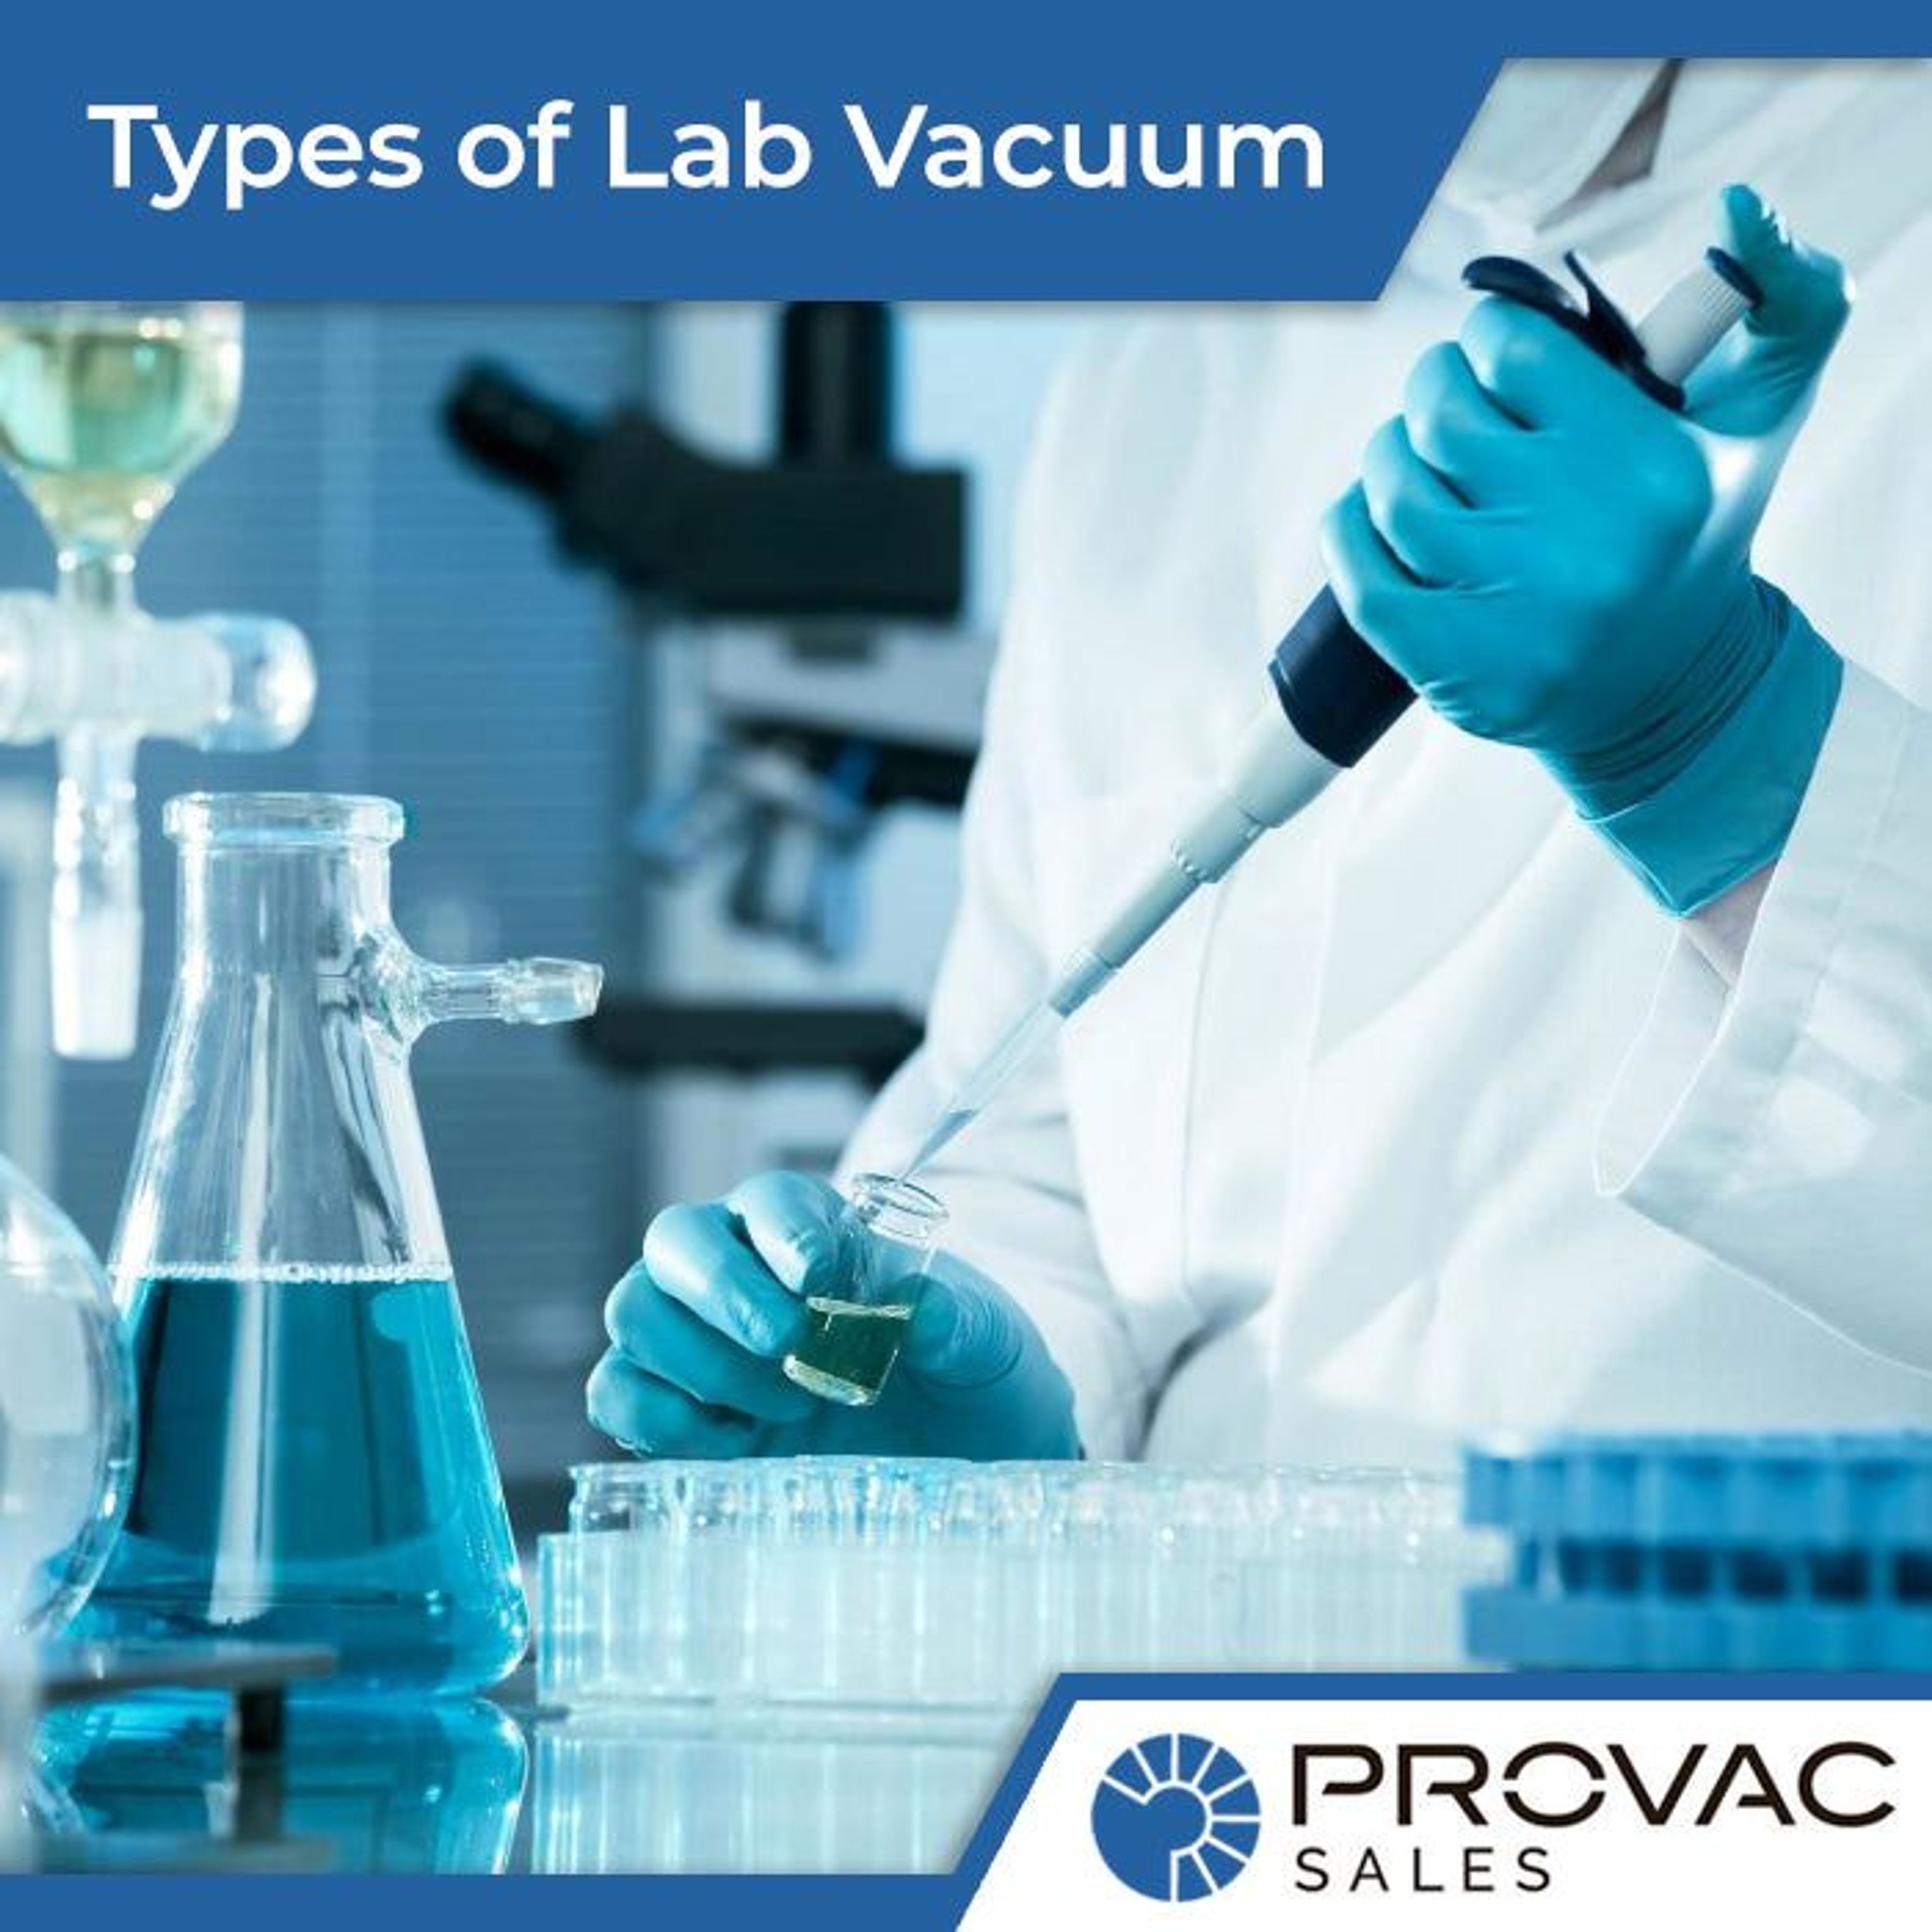 Types of Vacuum Pumps for a Laboratory Background